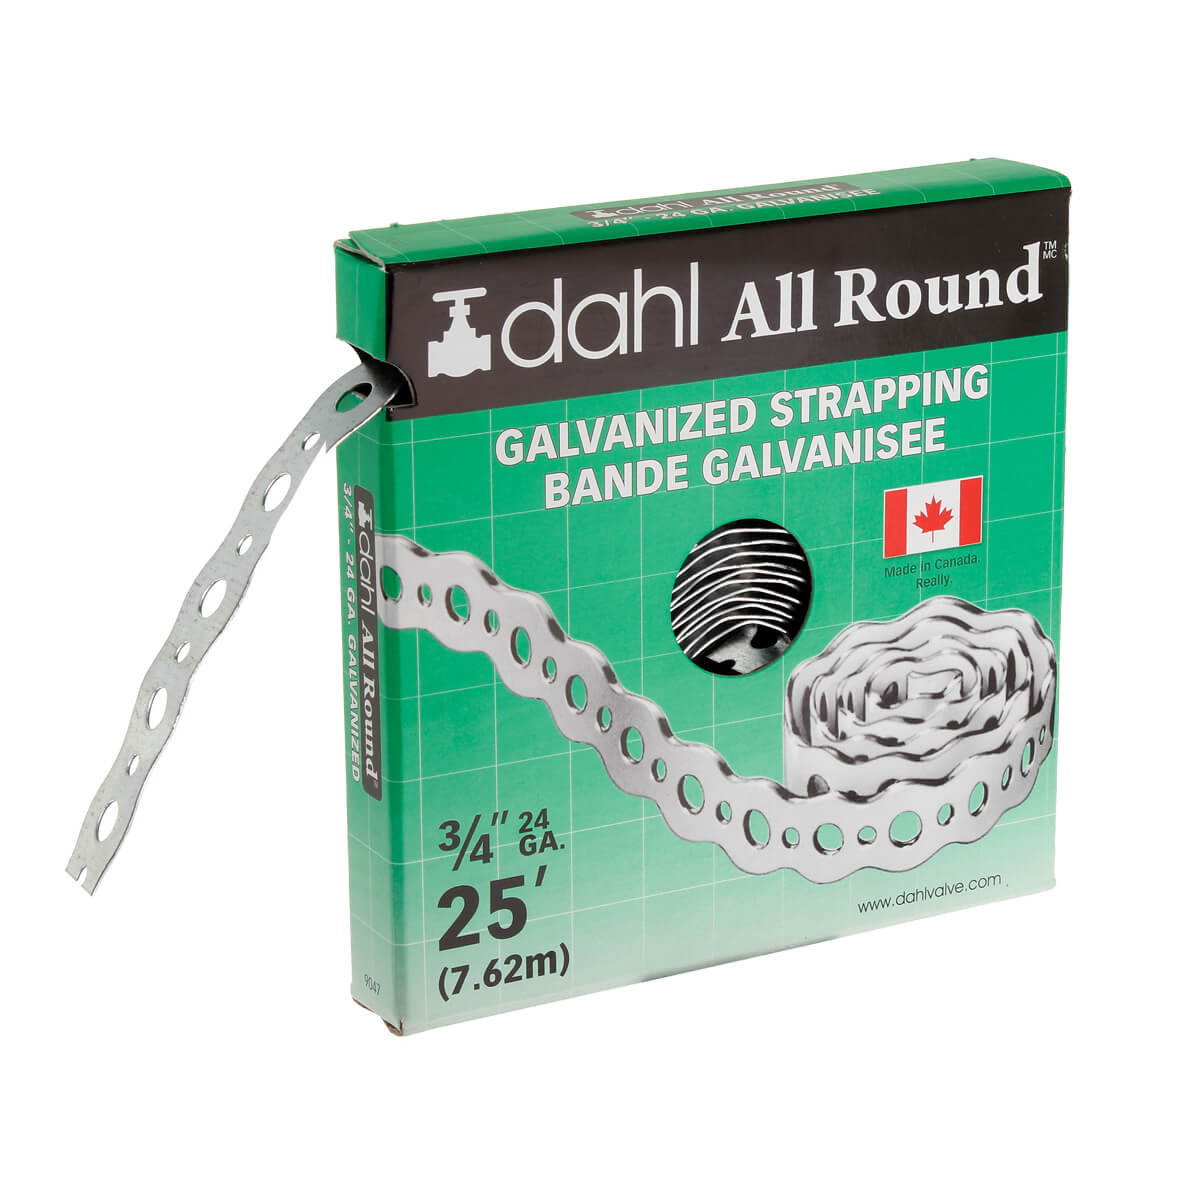 All Round Strapping™ - 3/4-in x 25-ft - 24 ga